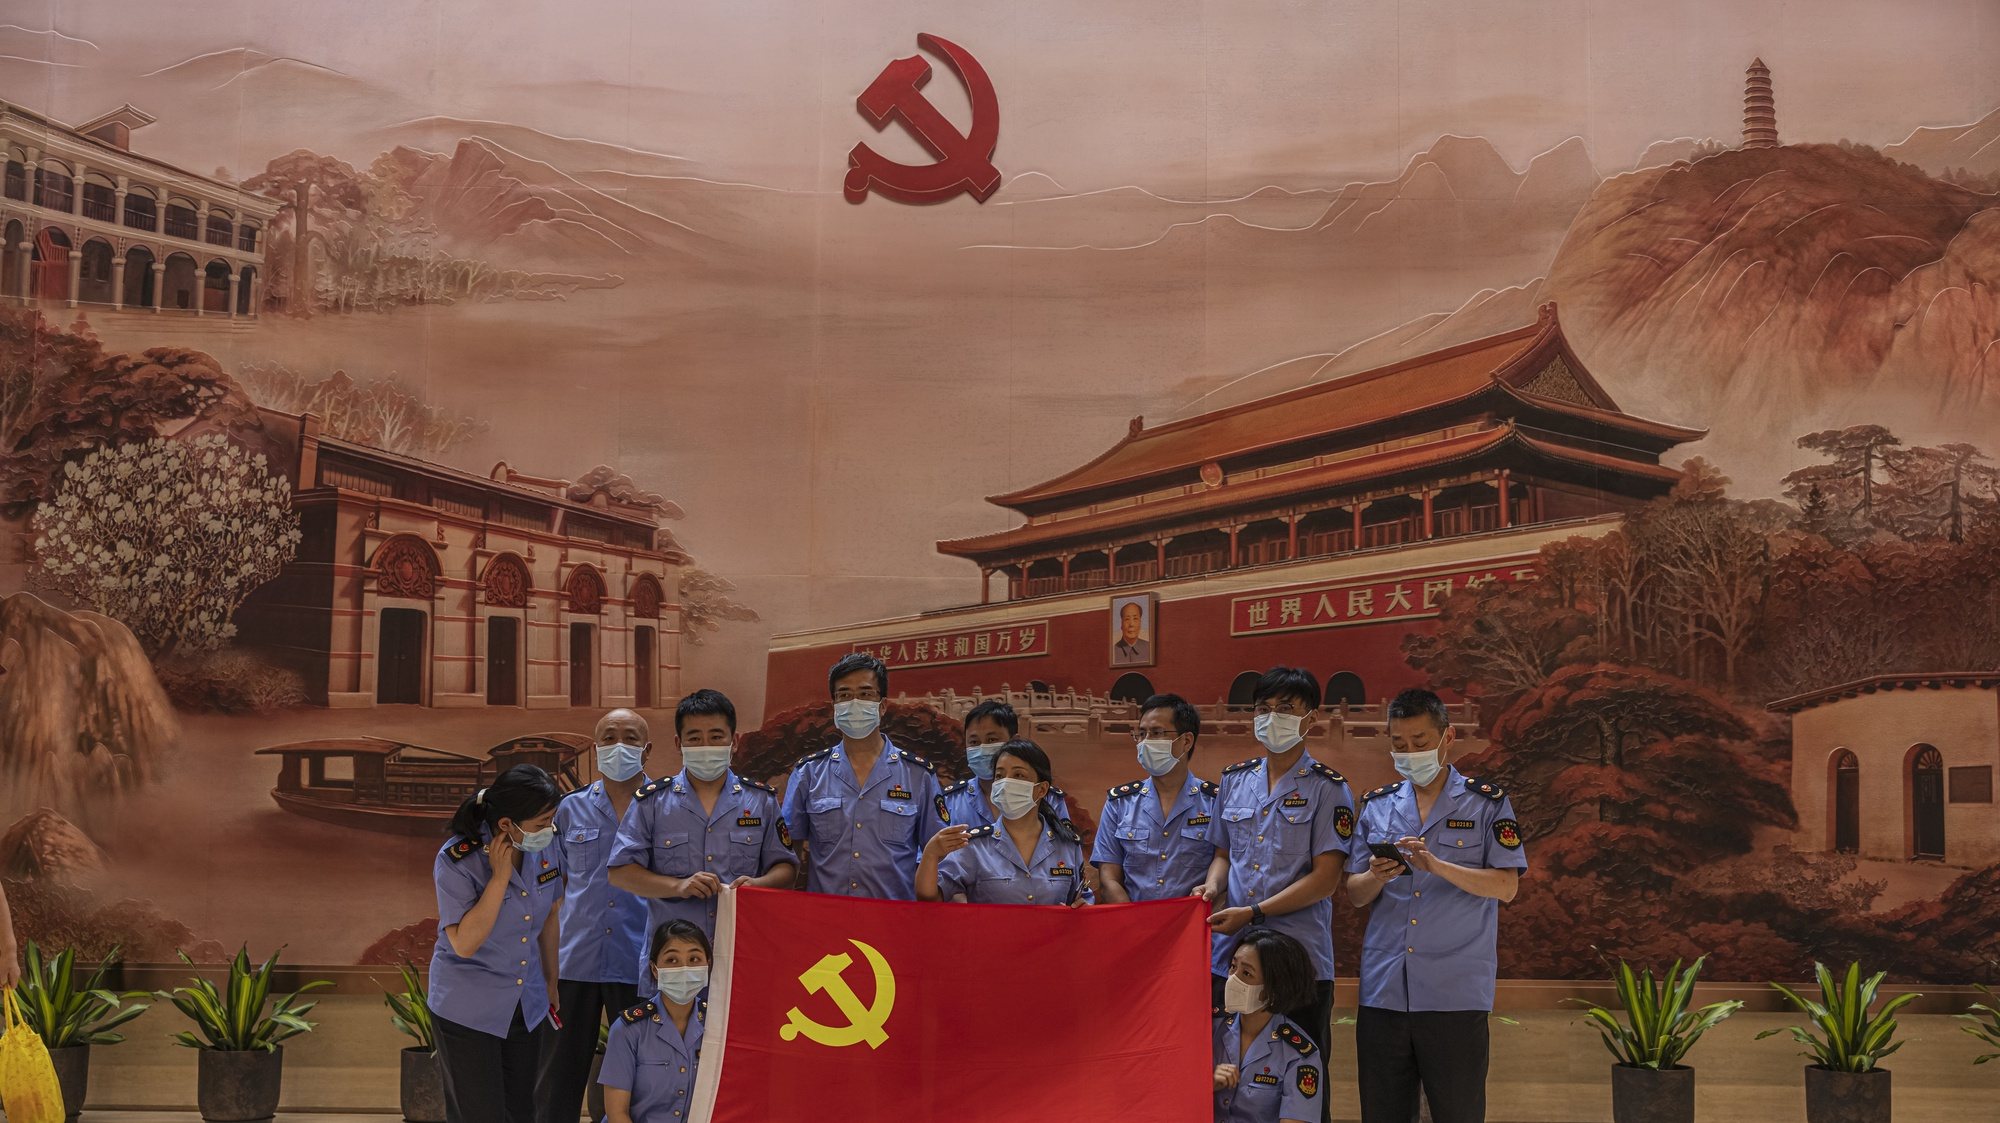 epa09314821 Members of the police pose in the Memorial of the 1st National Congress of the CPC (Chinese Communist Party), in Shanghai, China, 01 July 2021. China celebrates on 01 July the 100th anniversary of the founding of the ruling Chinese Communist Party.  EPA/ALEX PLAVEVSKI